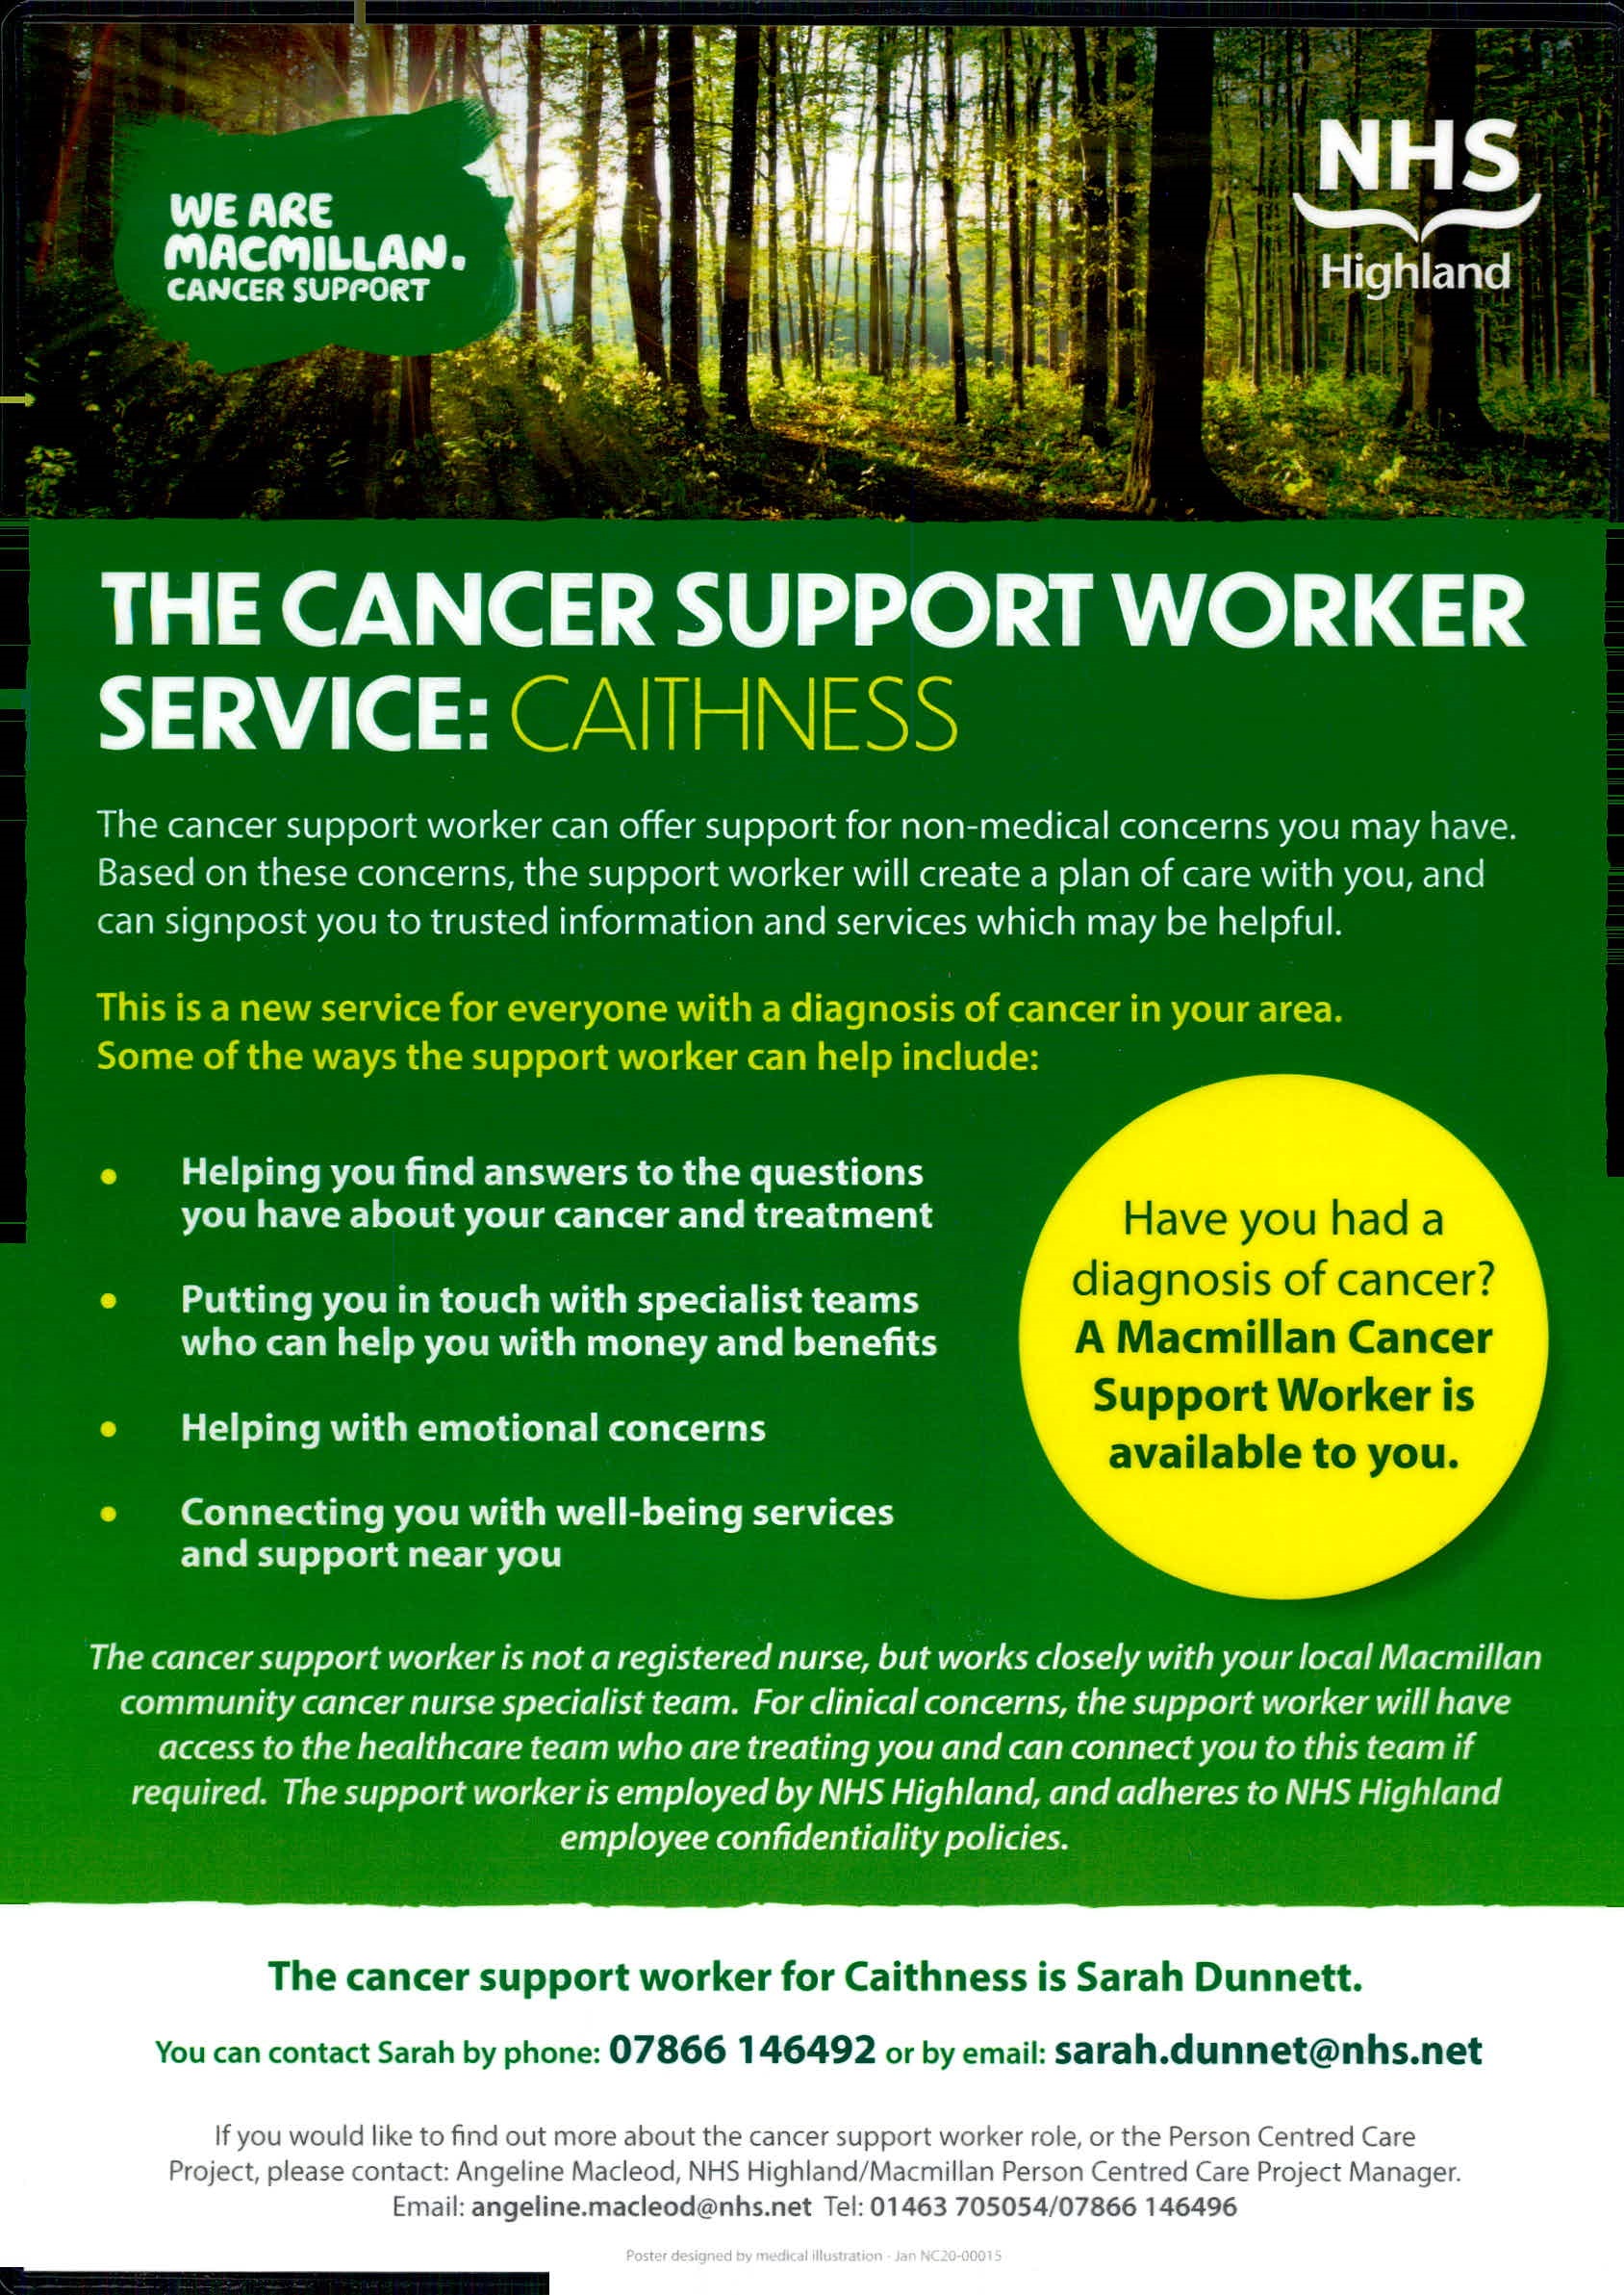 Caithness Cancer Support Worker Poster